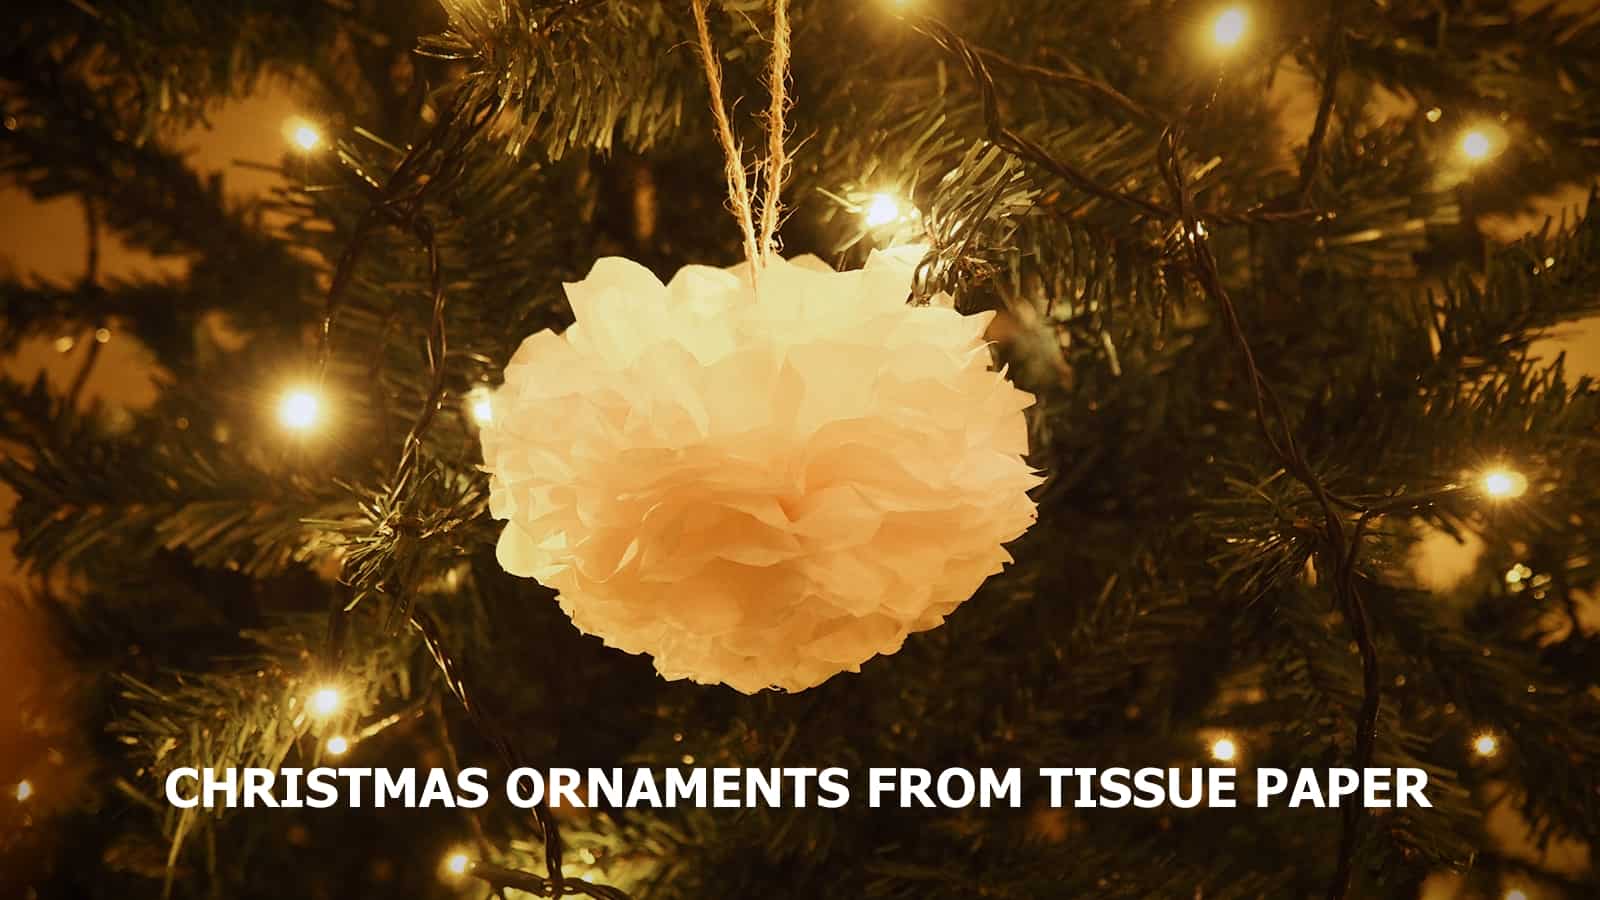 How to Make a Christmas ornaments from tissue paper